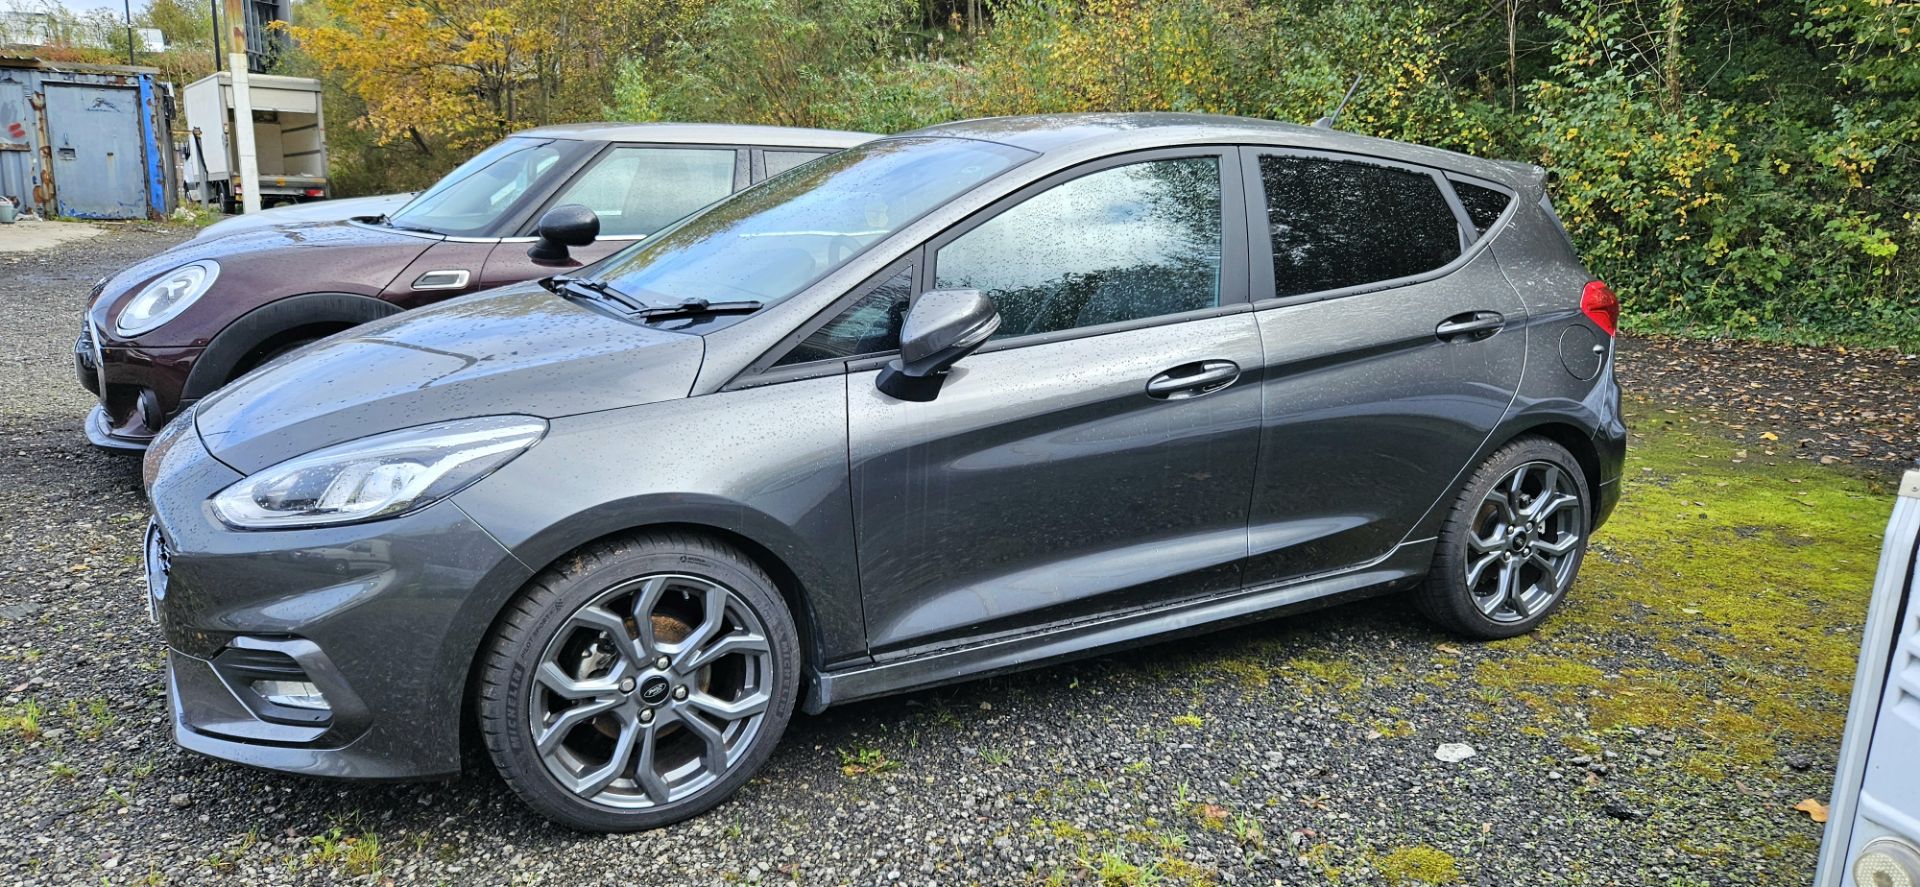 2019 FORD FIESTA ST LINE 1 LITRE AUTOMATIC - Image 8 of 8